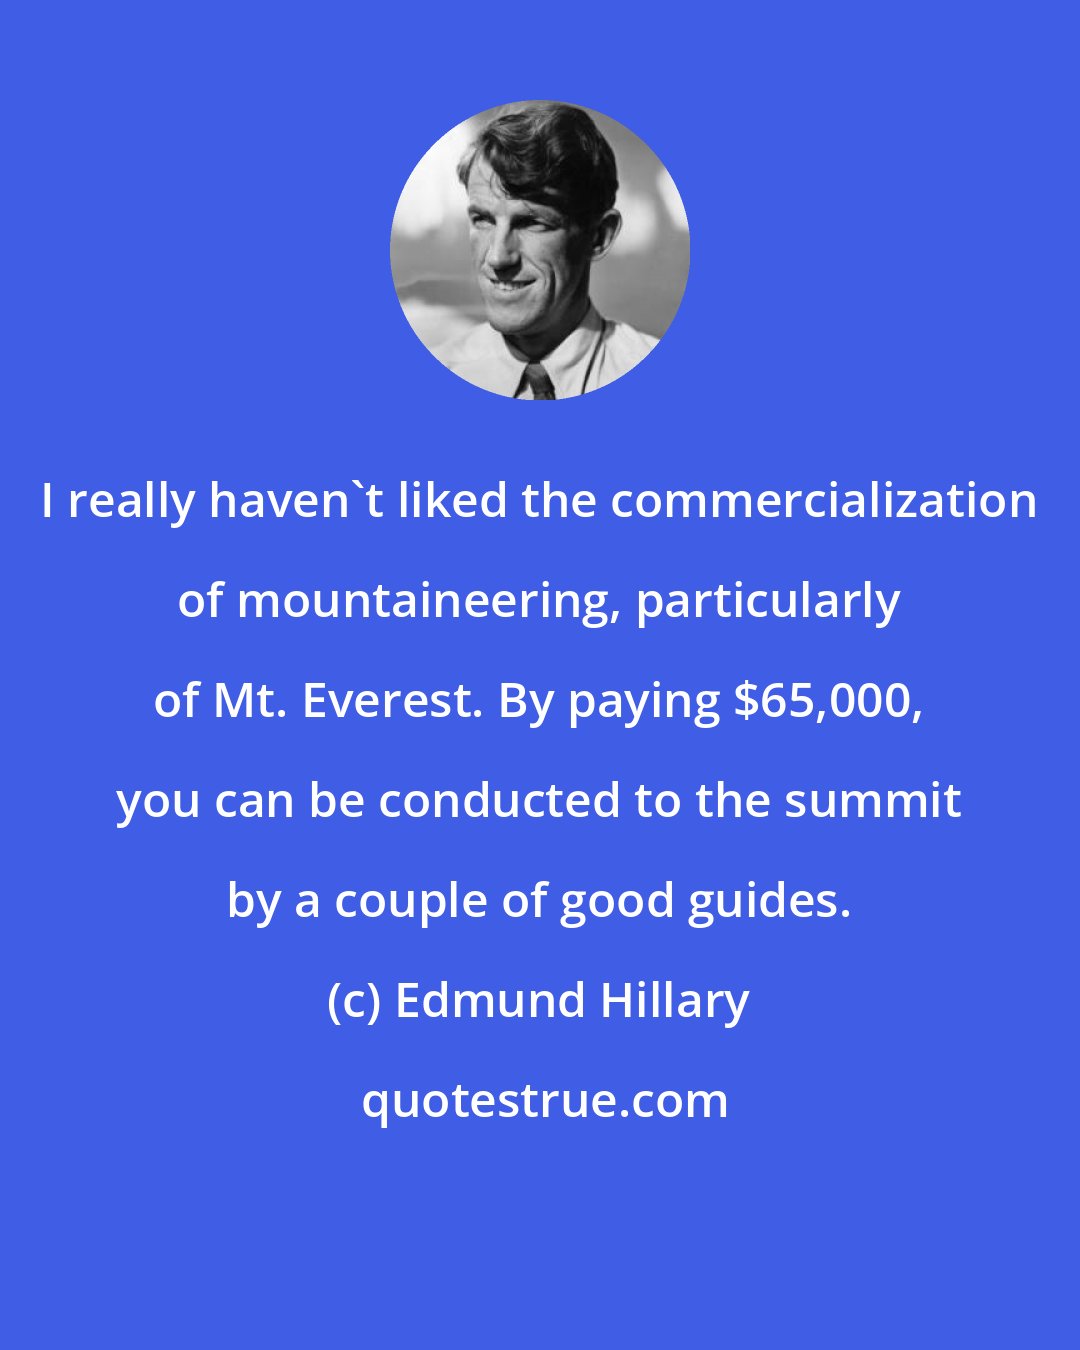 Edmund Hillary: I really haven't liked the commercialization of mountaineering, particularly of Mt. Everest. By paying $65,000, you can be conducted to the summit by a couple of good guides.